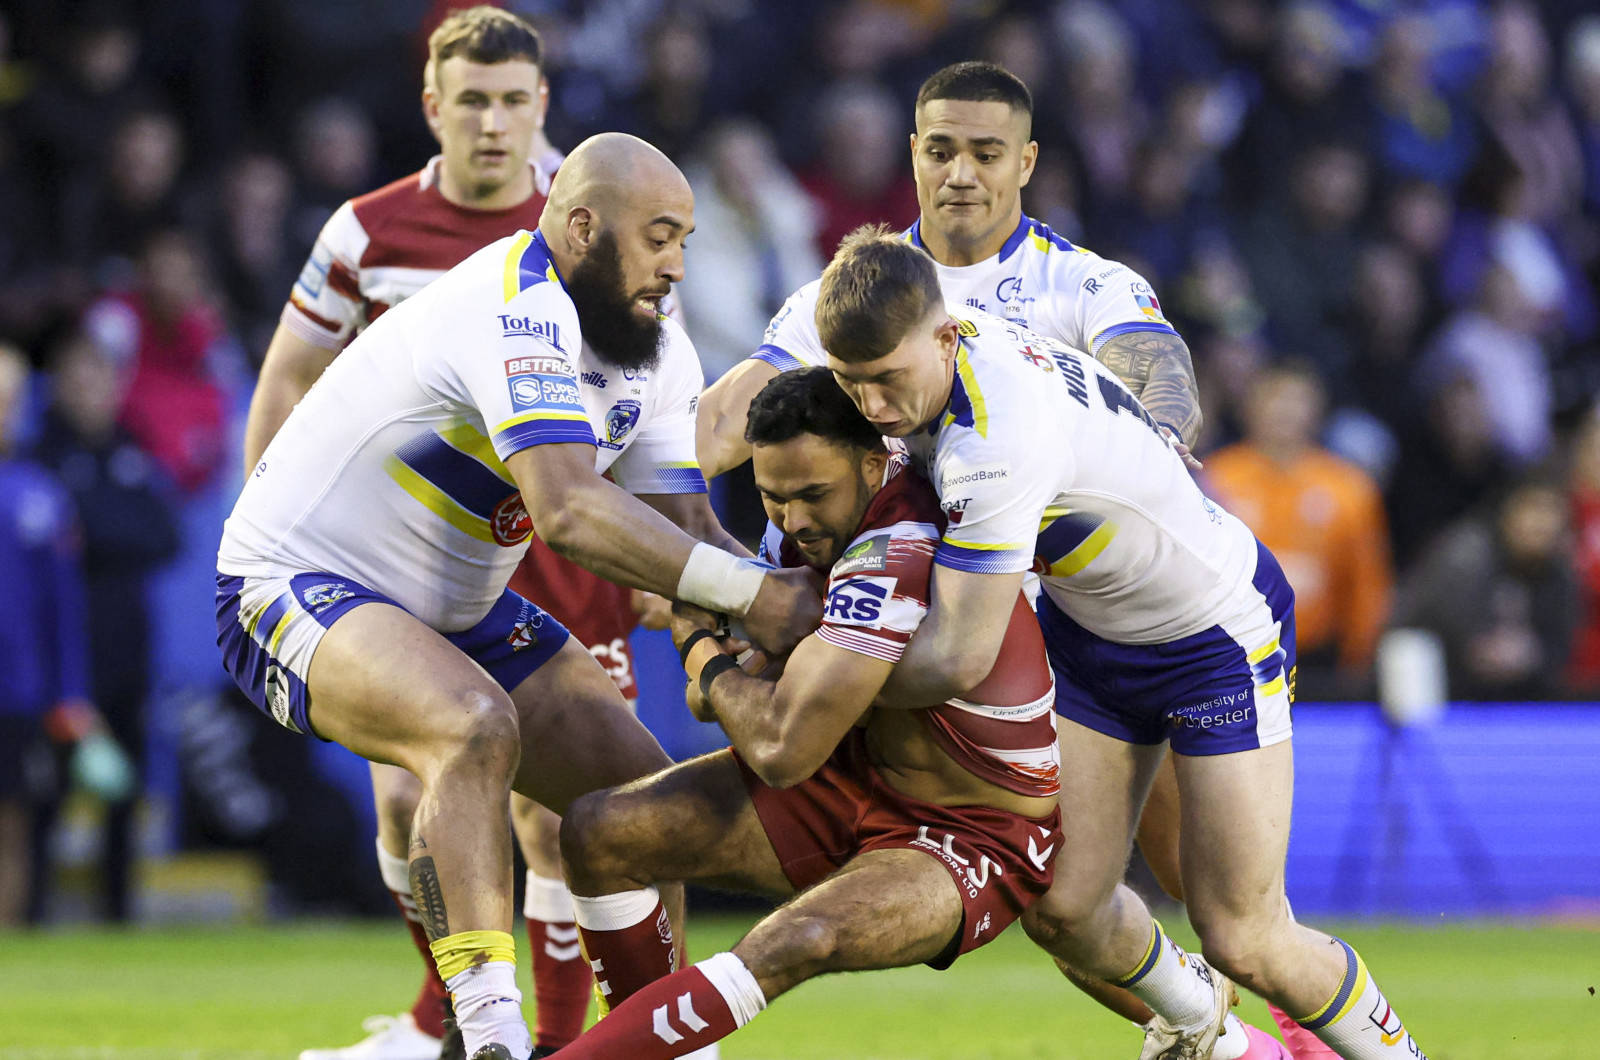 Challenge Cup quarter-final draw confirmed